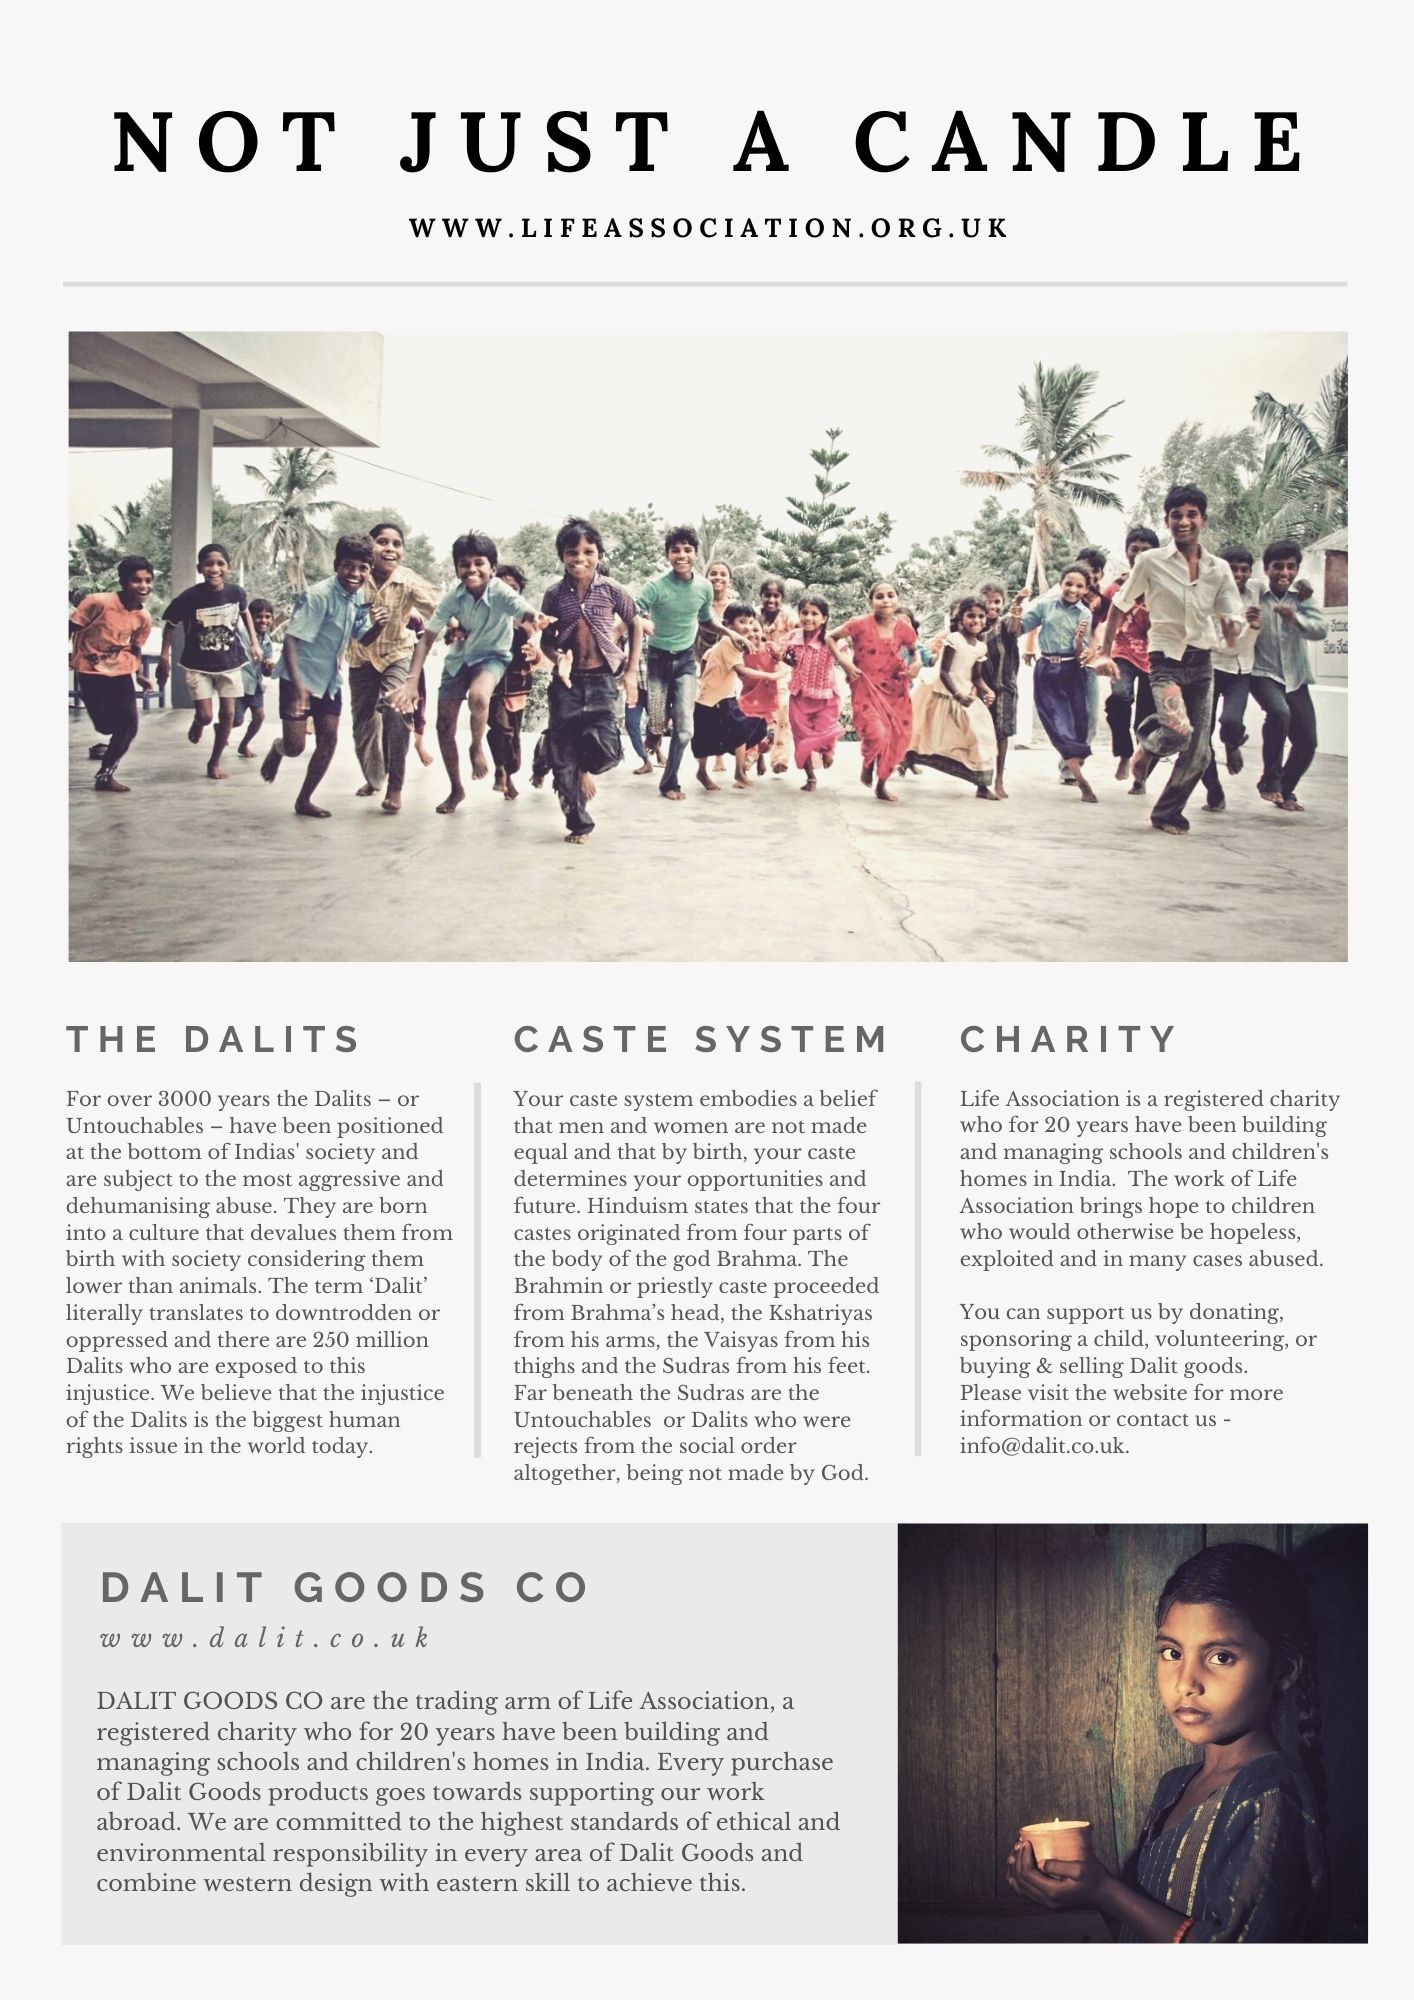 Dalit Goods - not just a candle